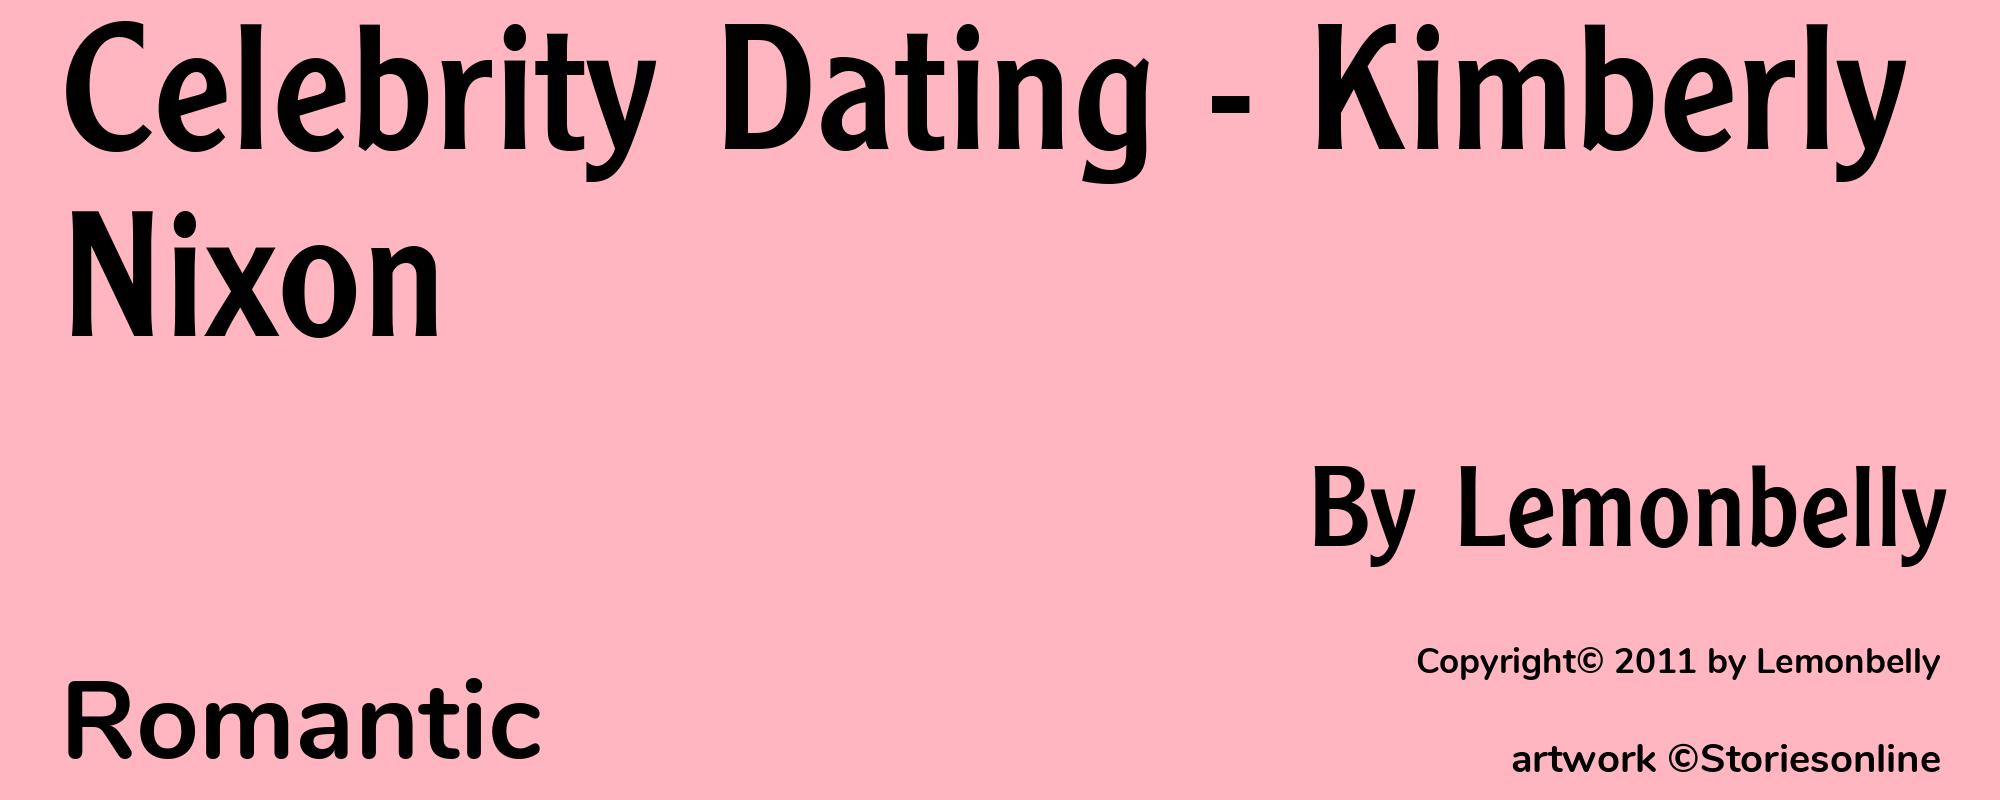 Celebrity Dating - Kimberly Nixon - Cover